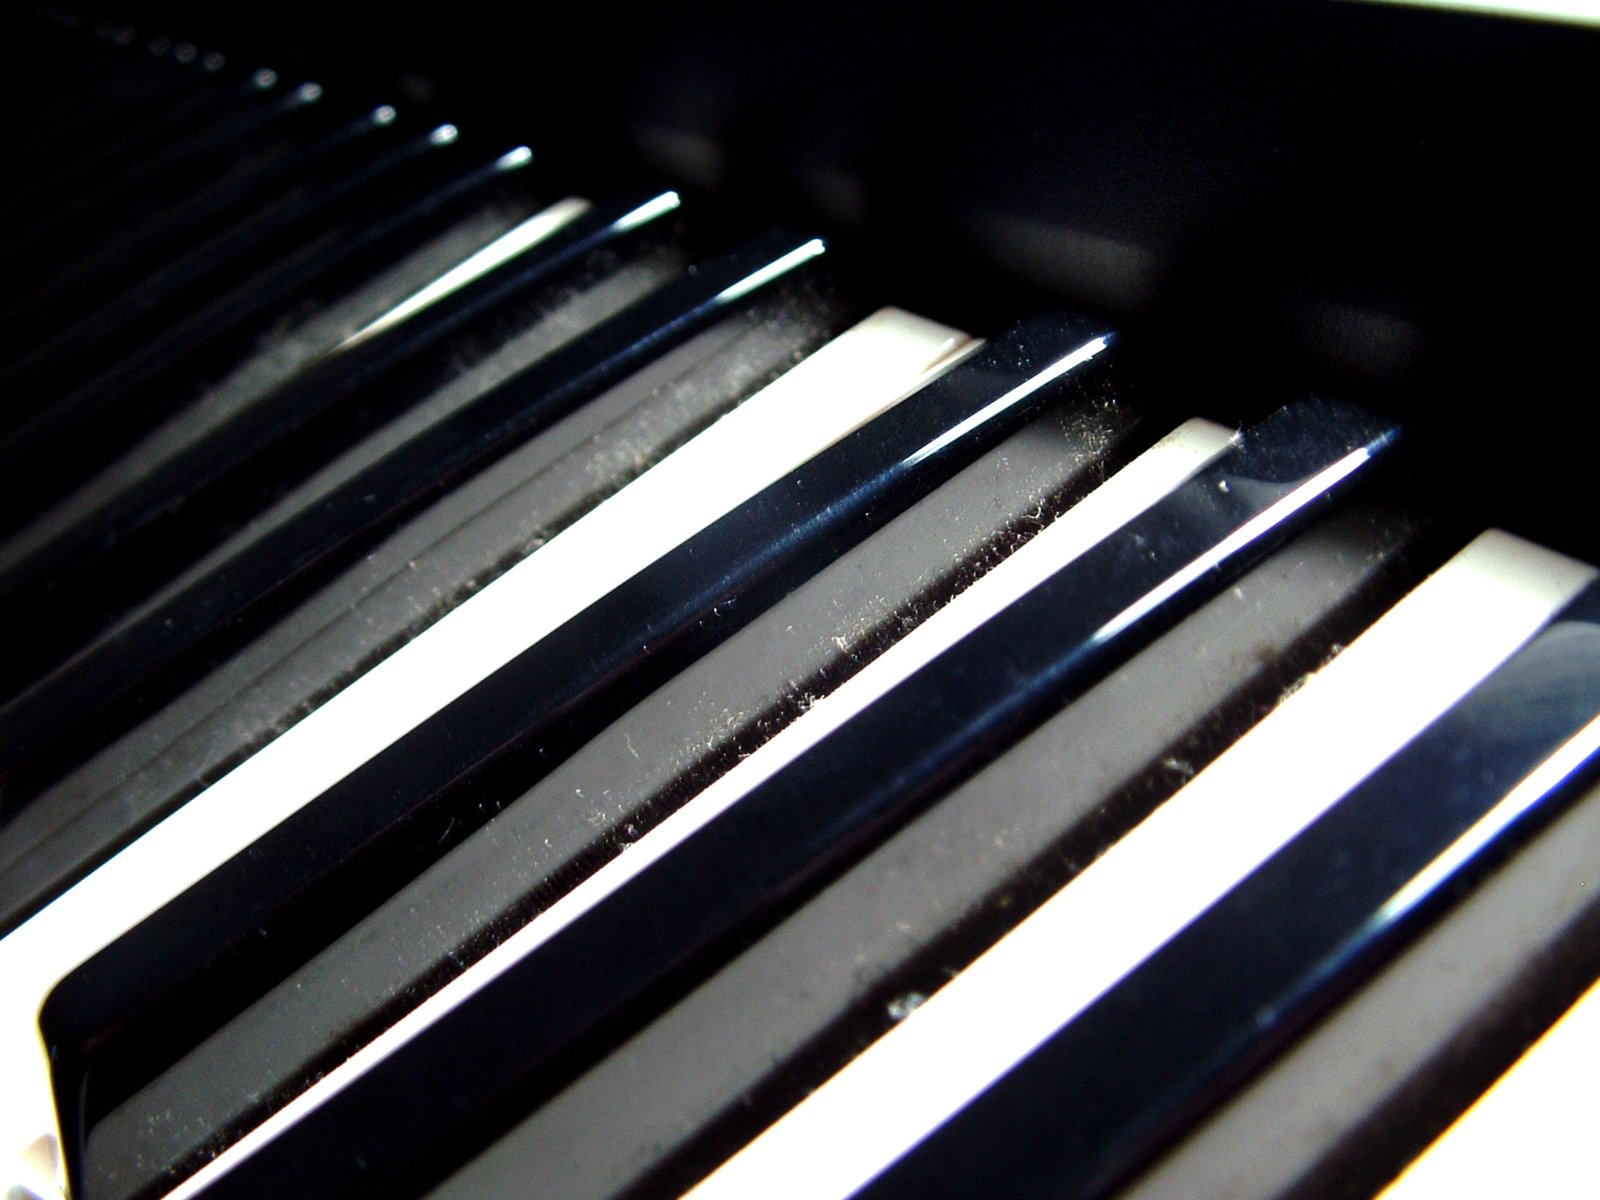 a view of the keys on the piano